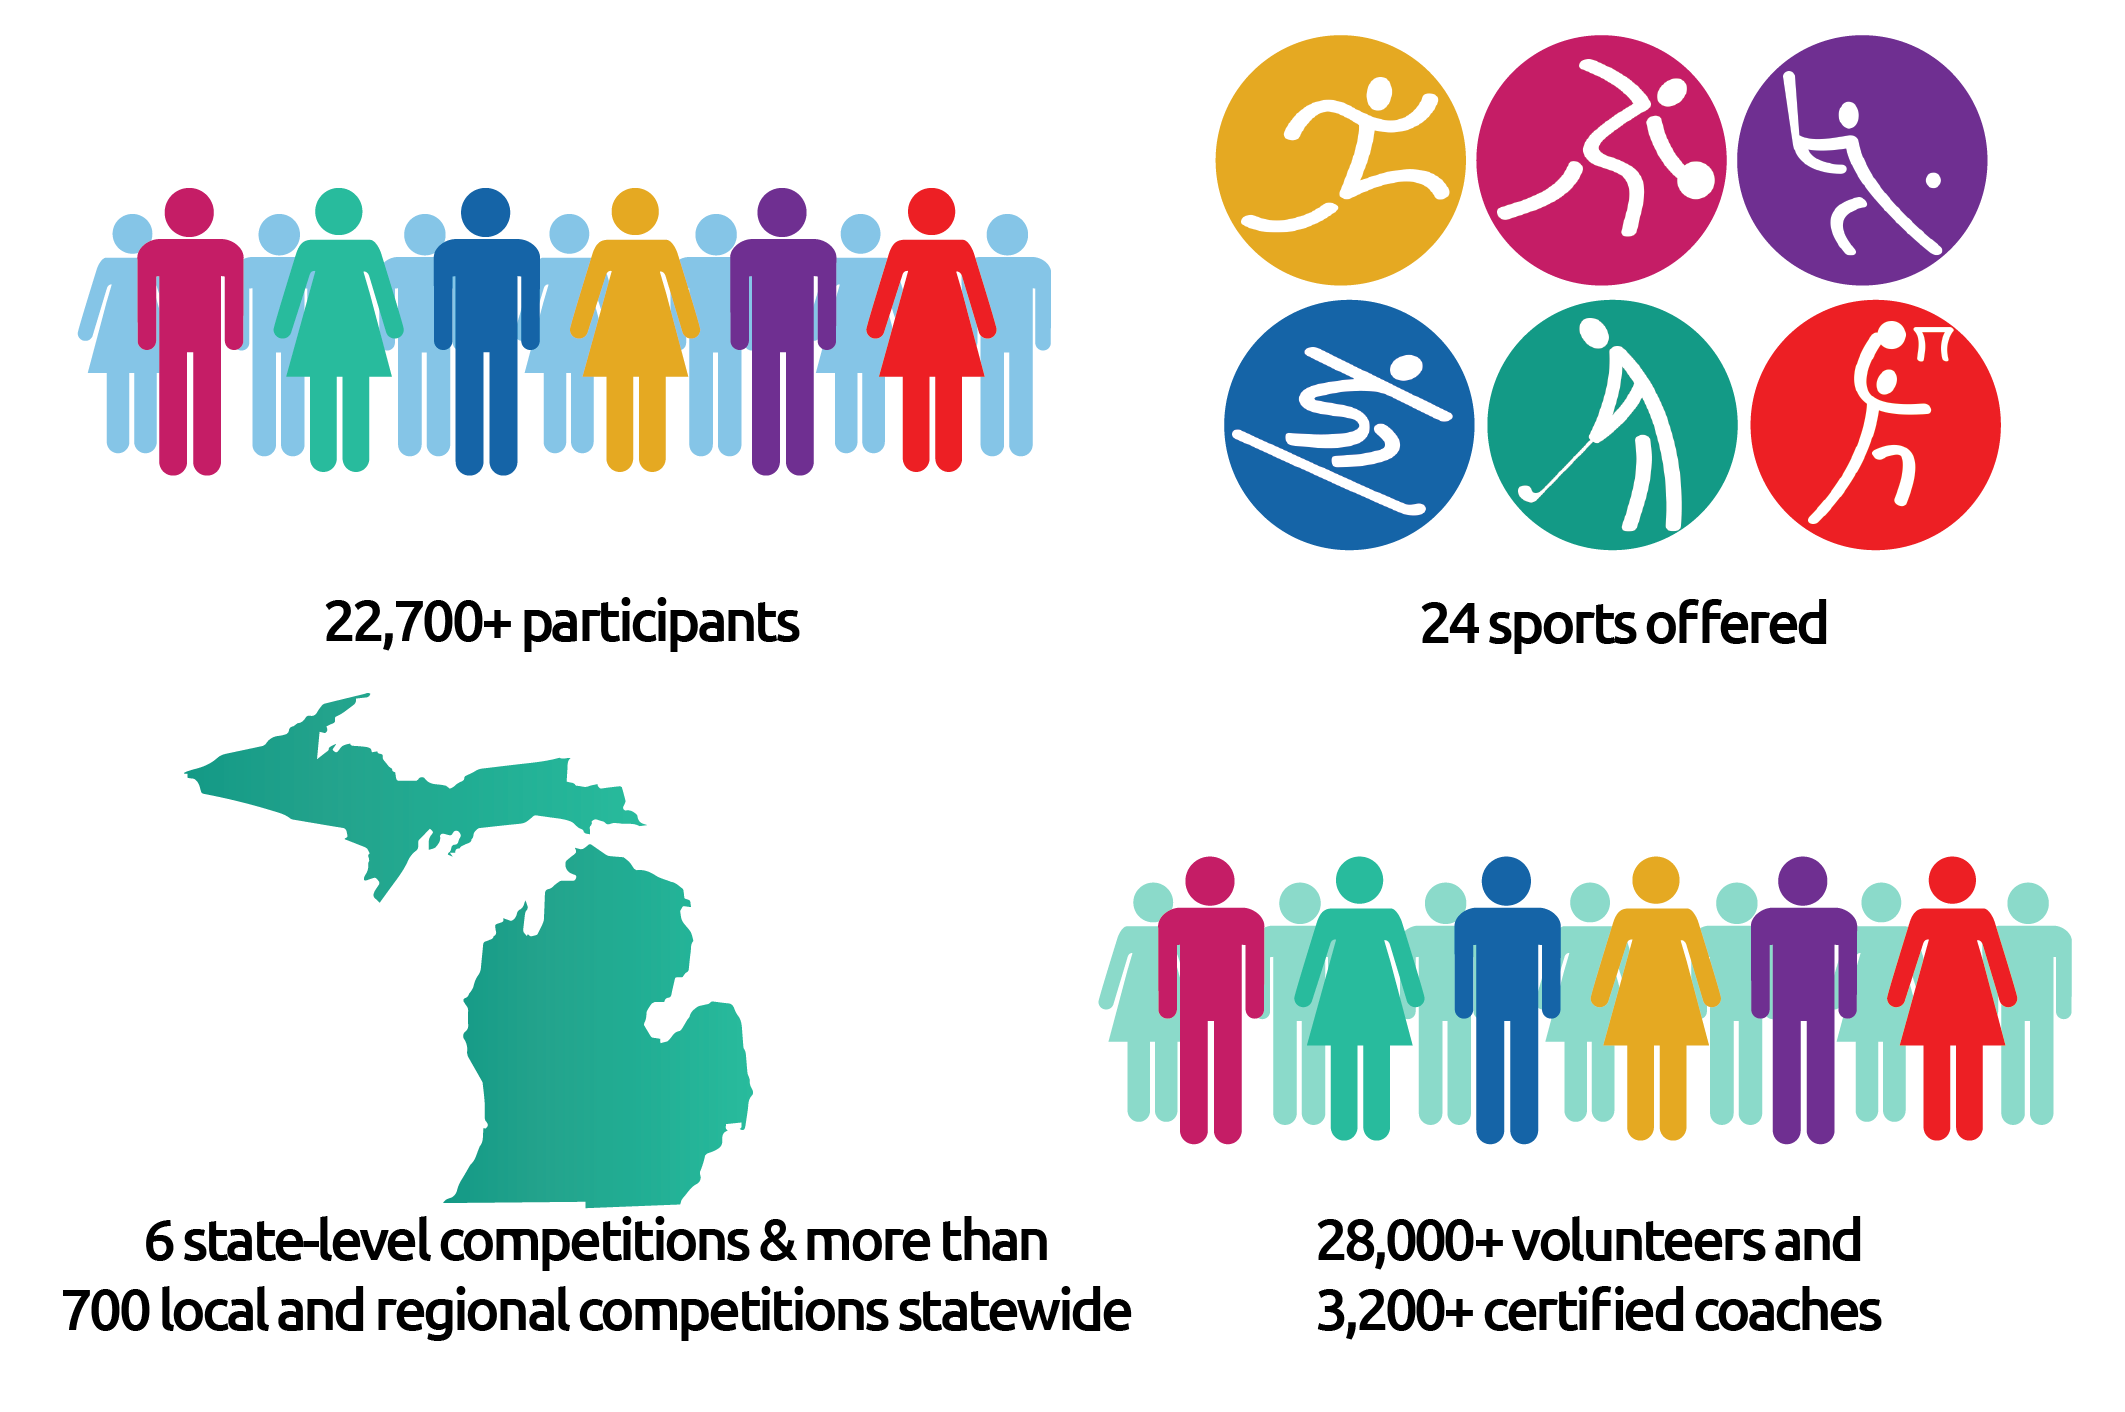 22,700+ participants, 24 sports offered, 6 state-level competitions and 700 local competitions. 28,00+ volunteers and 3,200+ certified coaches